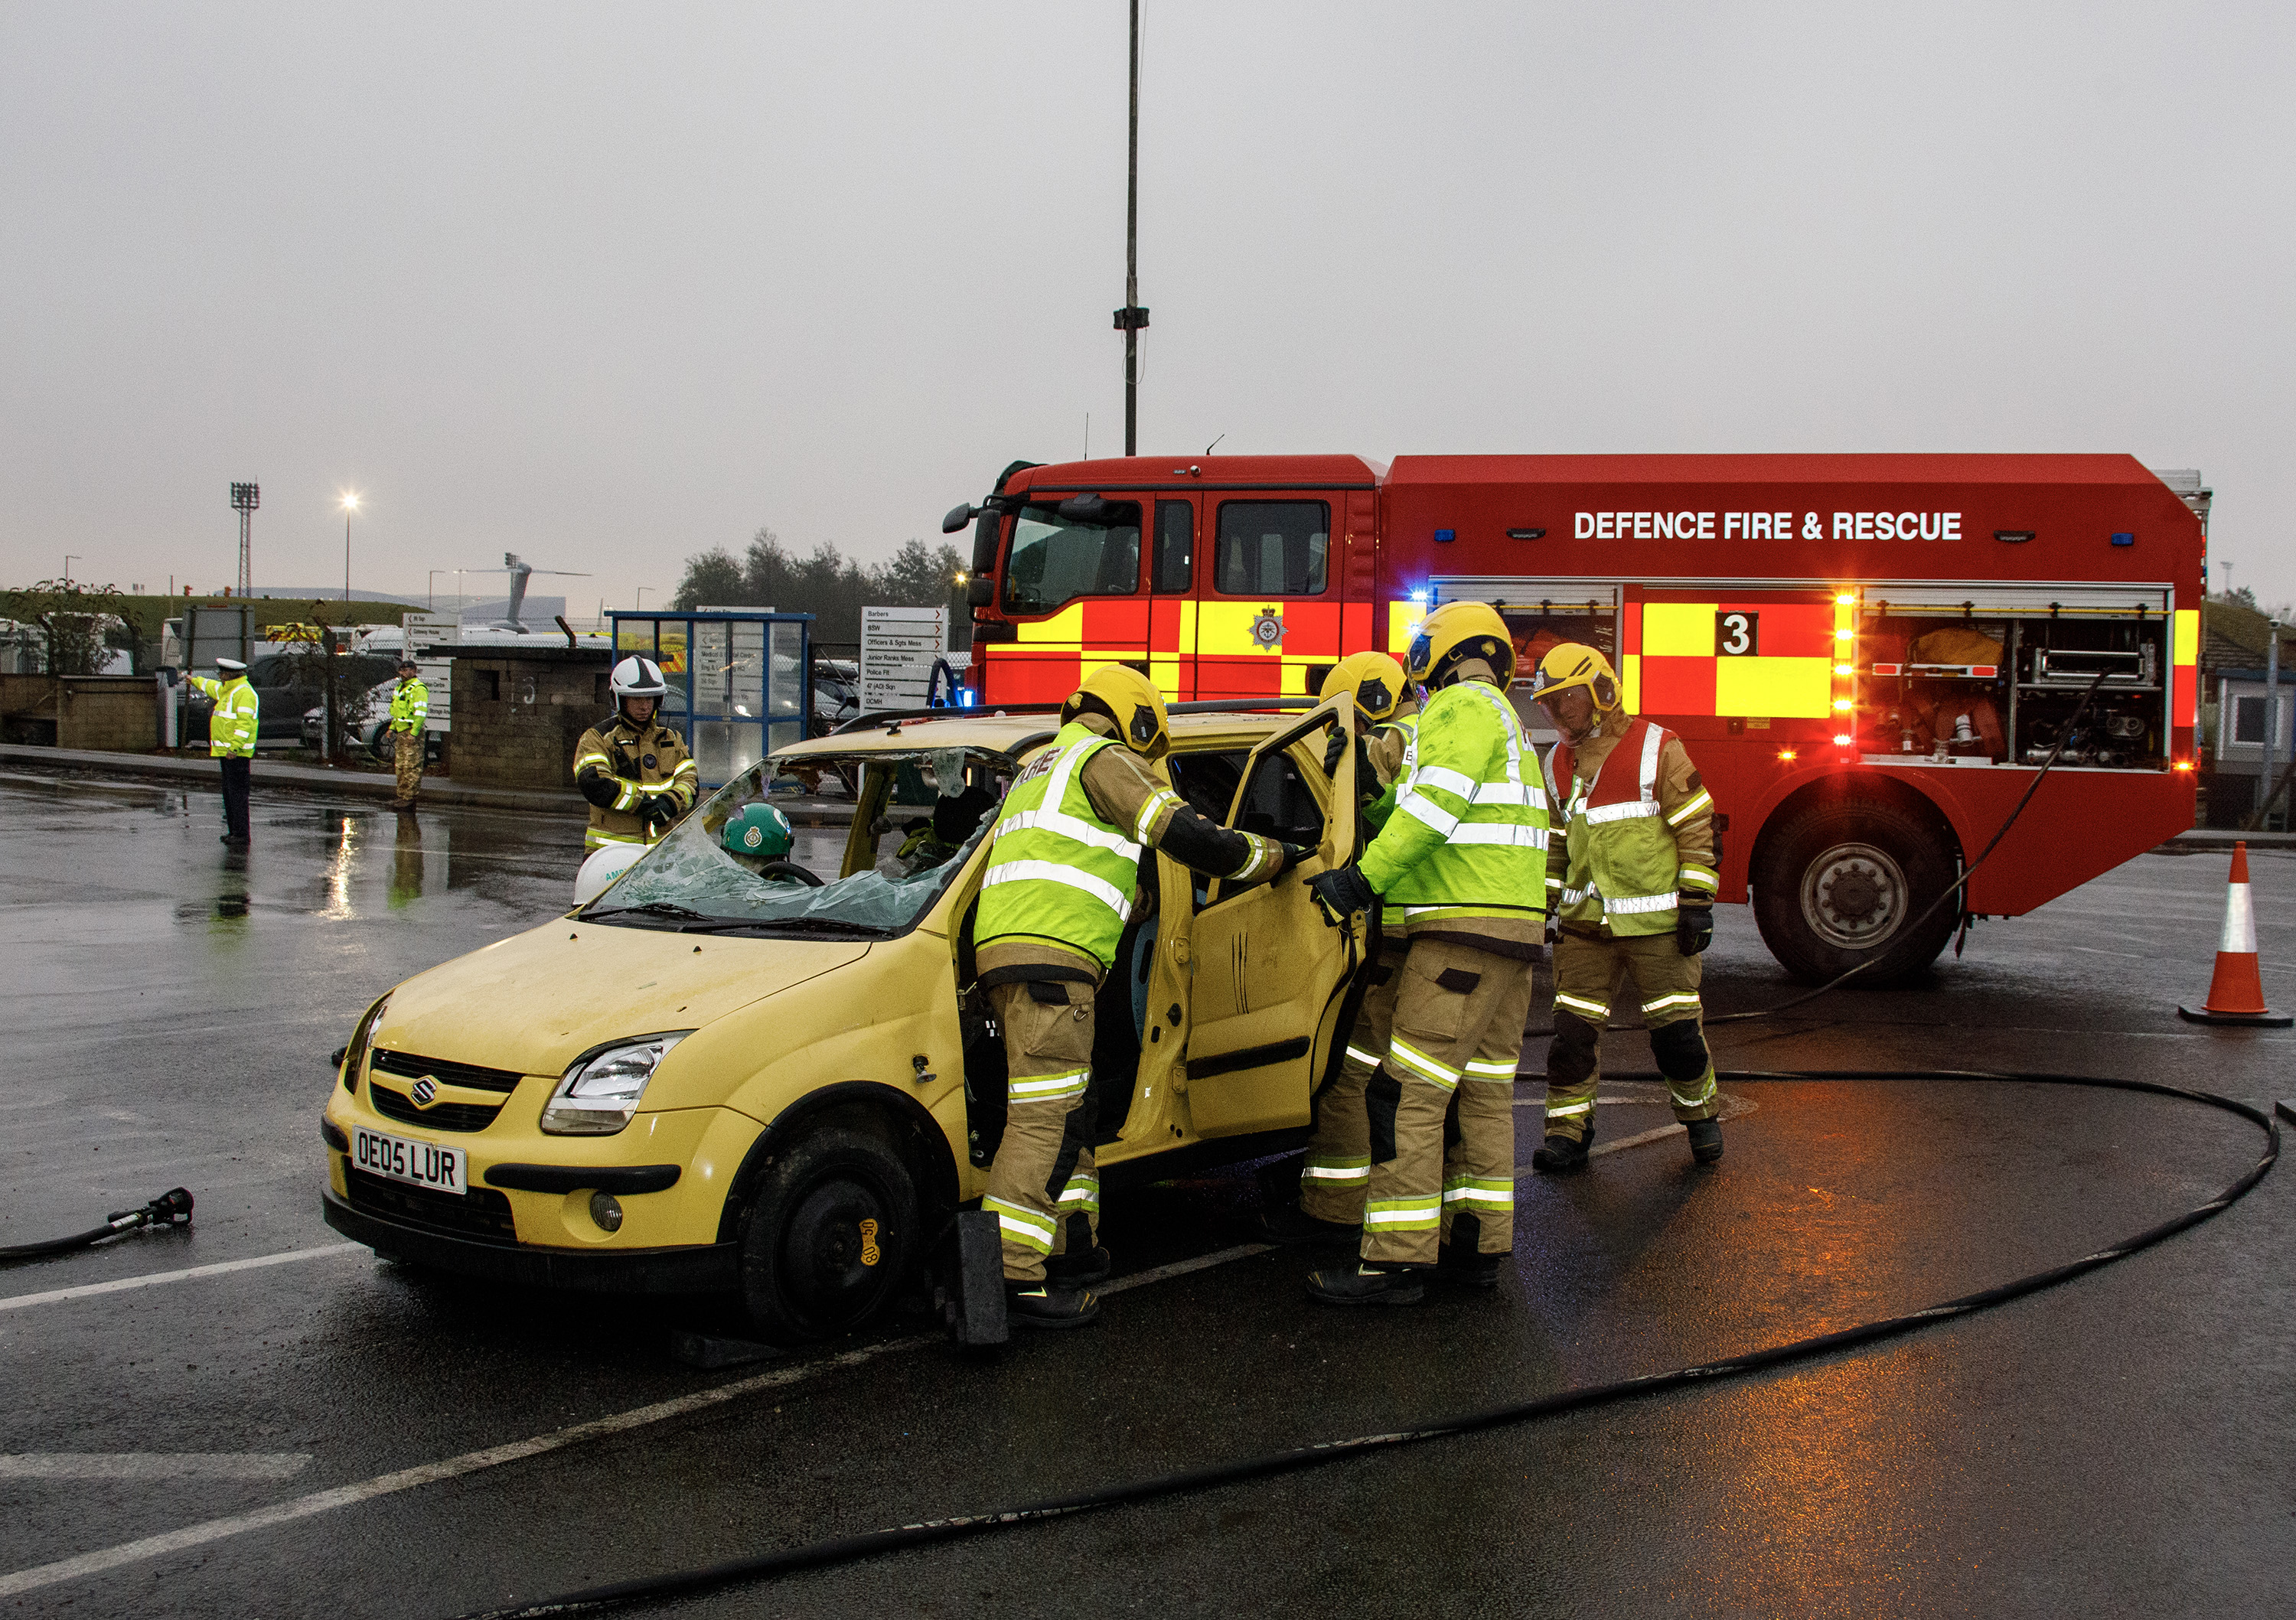 Photo - Image shows RAF police managing and directing traffic flow and a Defence Fire and rescue vehicle in the background, with fire personnel next to the car, on the passenger side, having opened the rear passenger door.